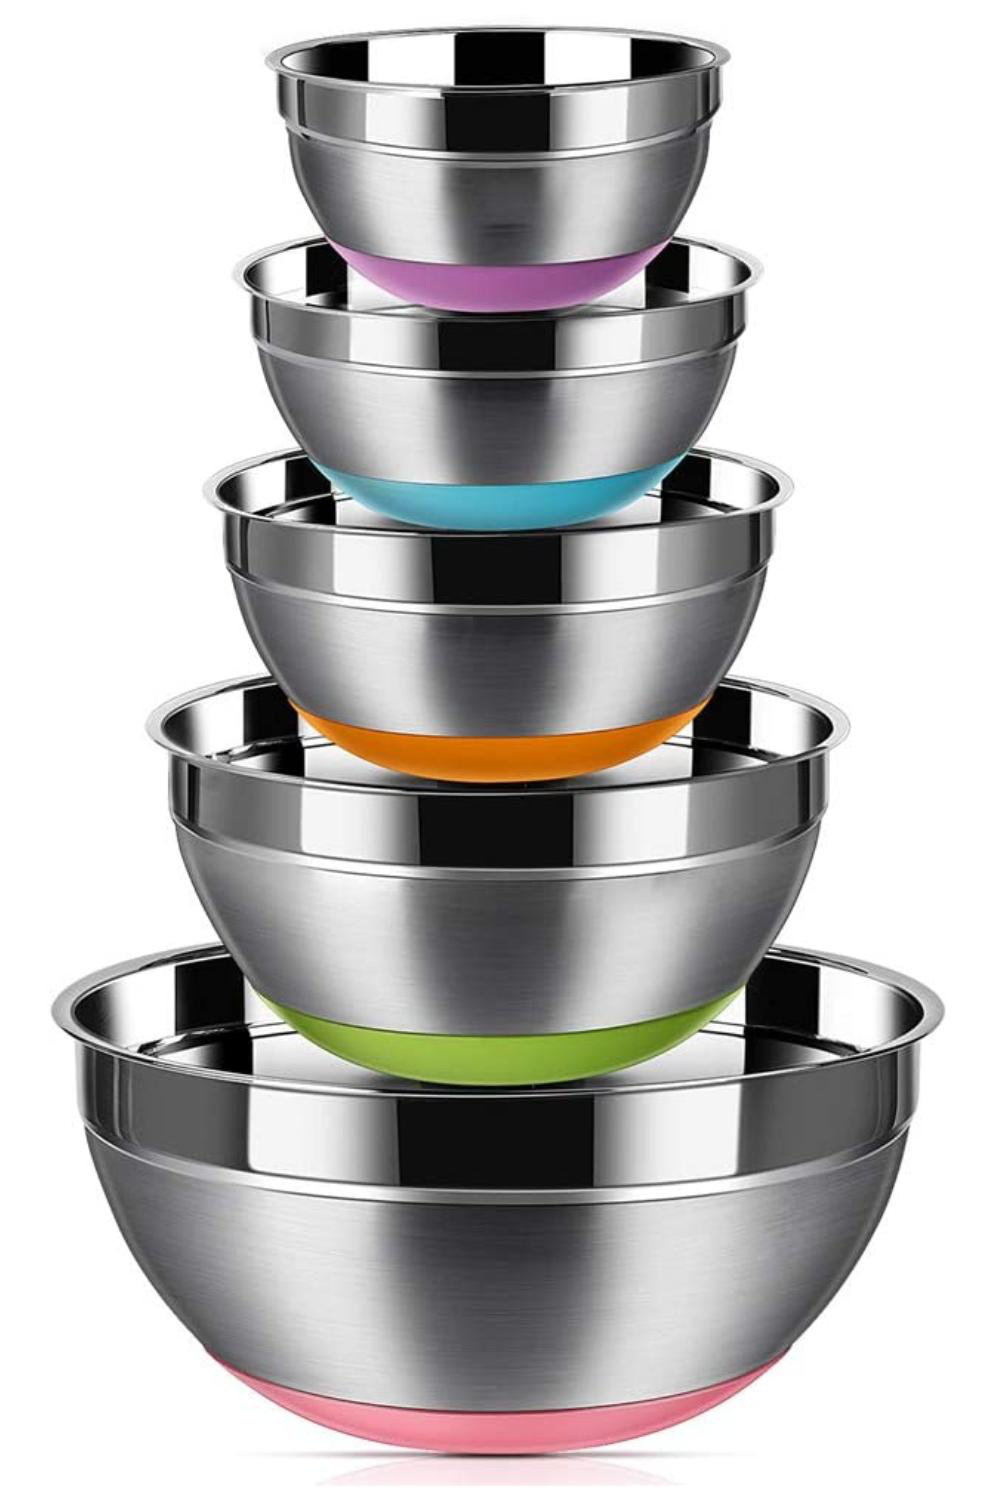 HOMEARRAY Stainless Steel Mixing Bowls Set (Set of 6) - Polished Mirror  kitchen bowls, Nesting Bowls for Space Saving Storage, Ideal For Cooking